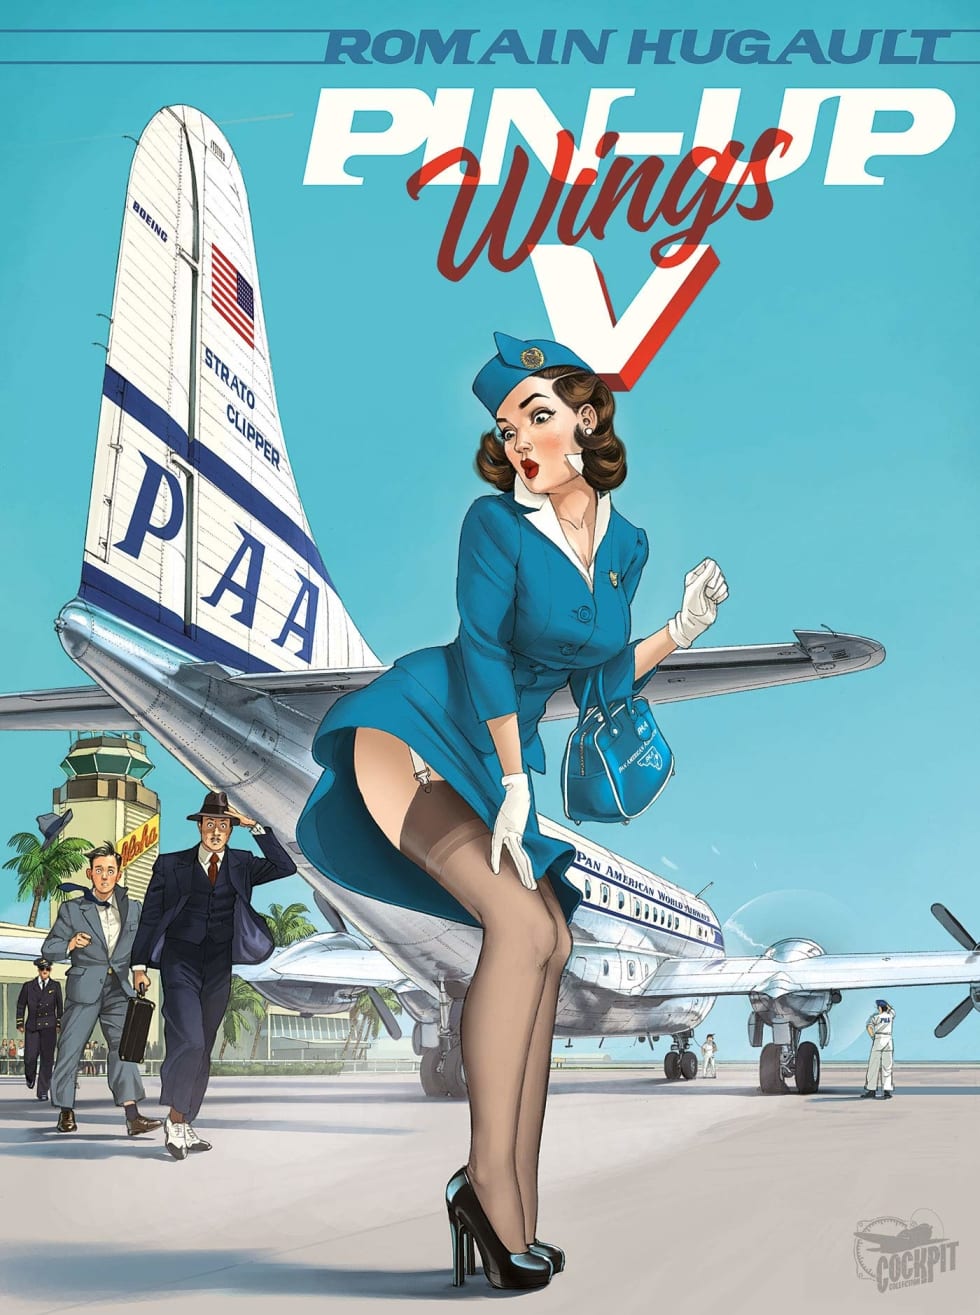 Pin-up wings Volume 5 book cover